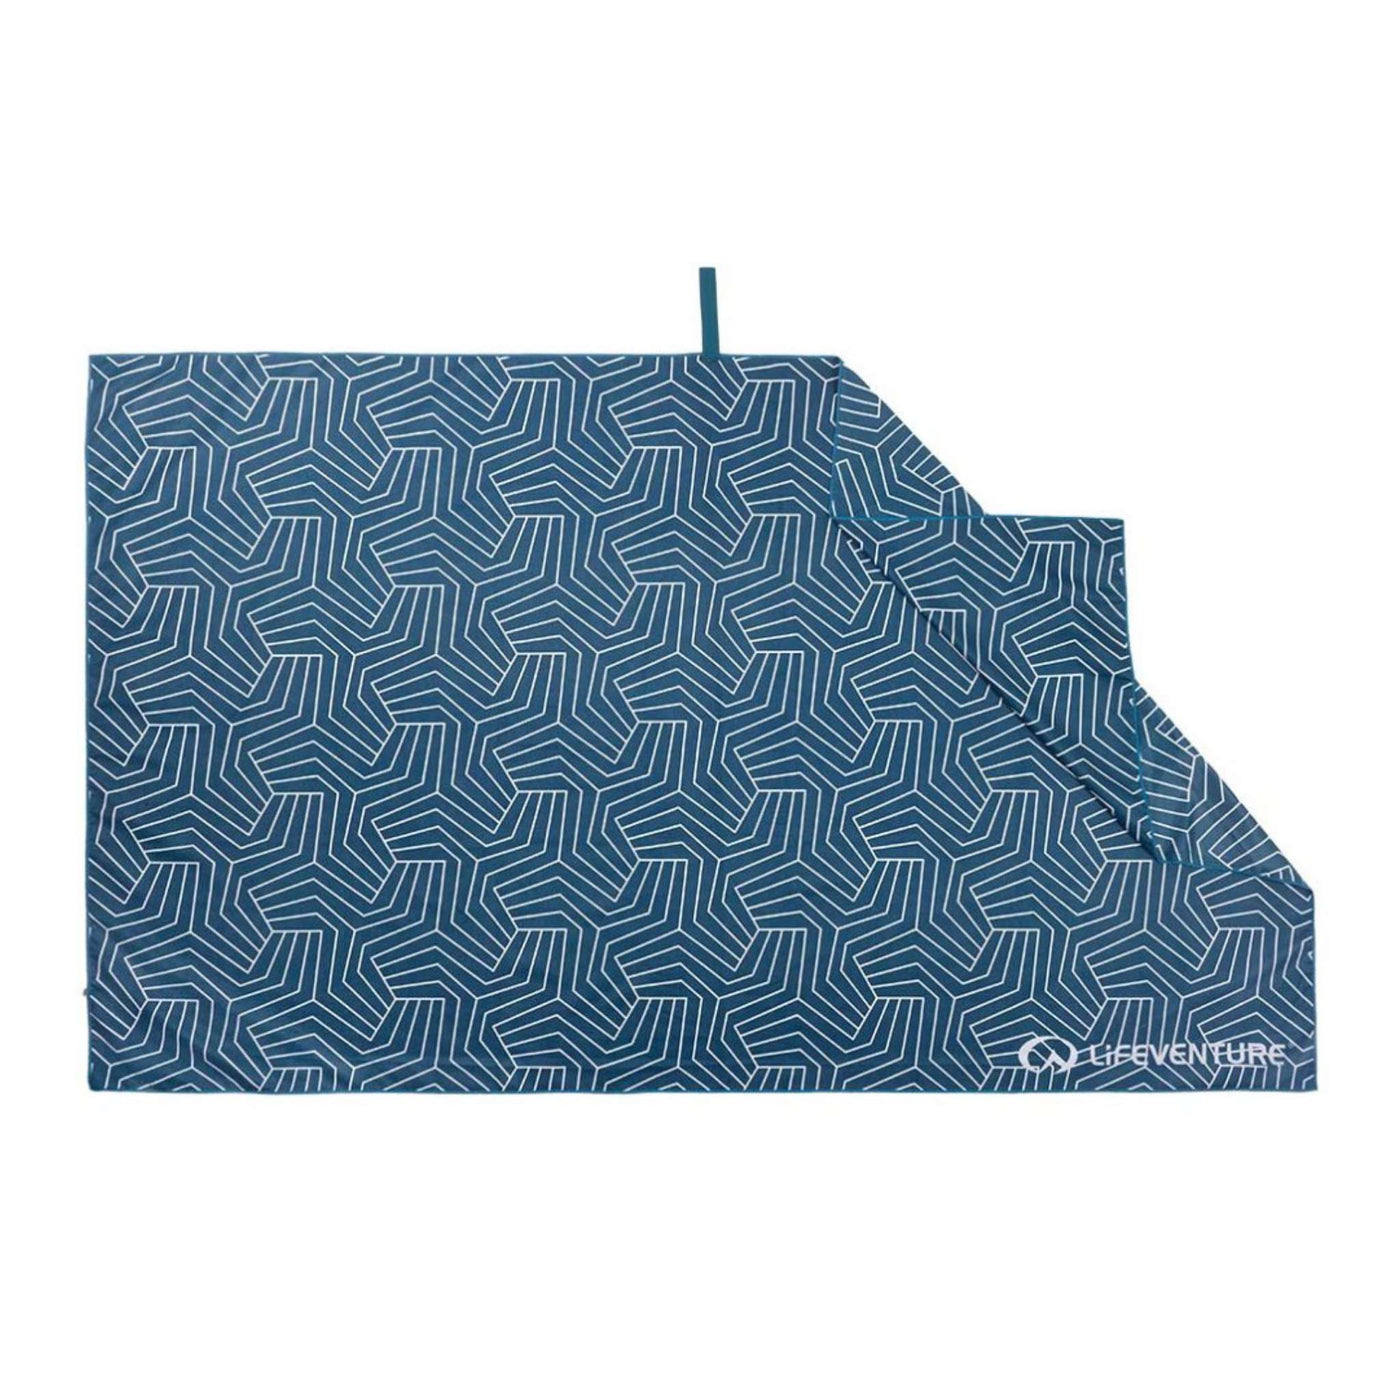 Lifeventure Recycled SoftFibre Printed Towels | Quickdry Travel Towel | Further Faster Christchurch NZ #geometric-navy